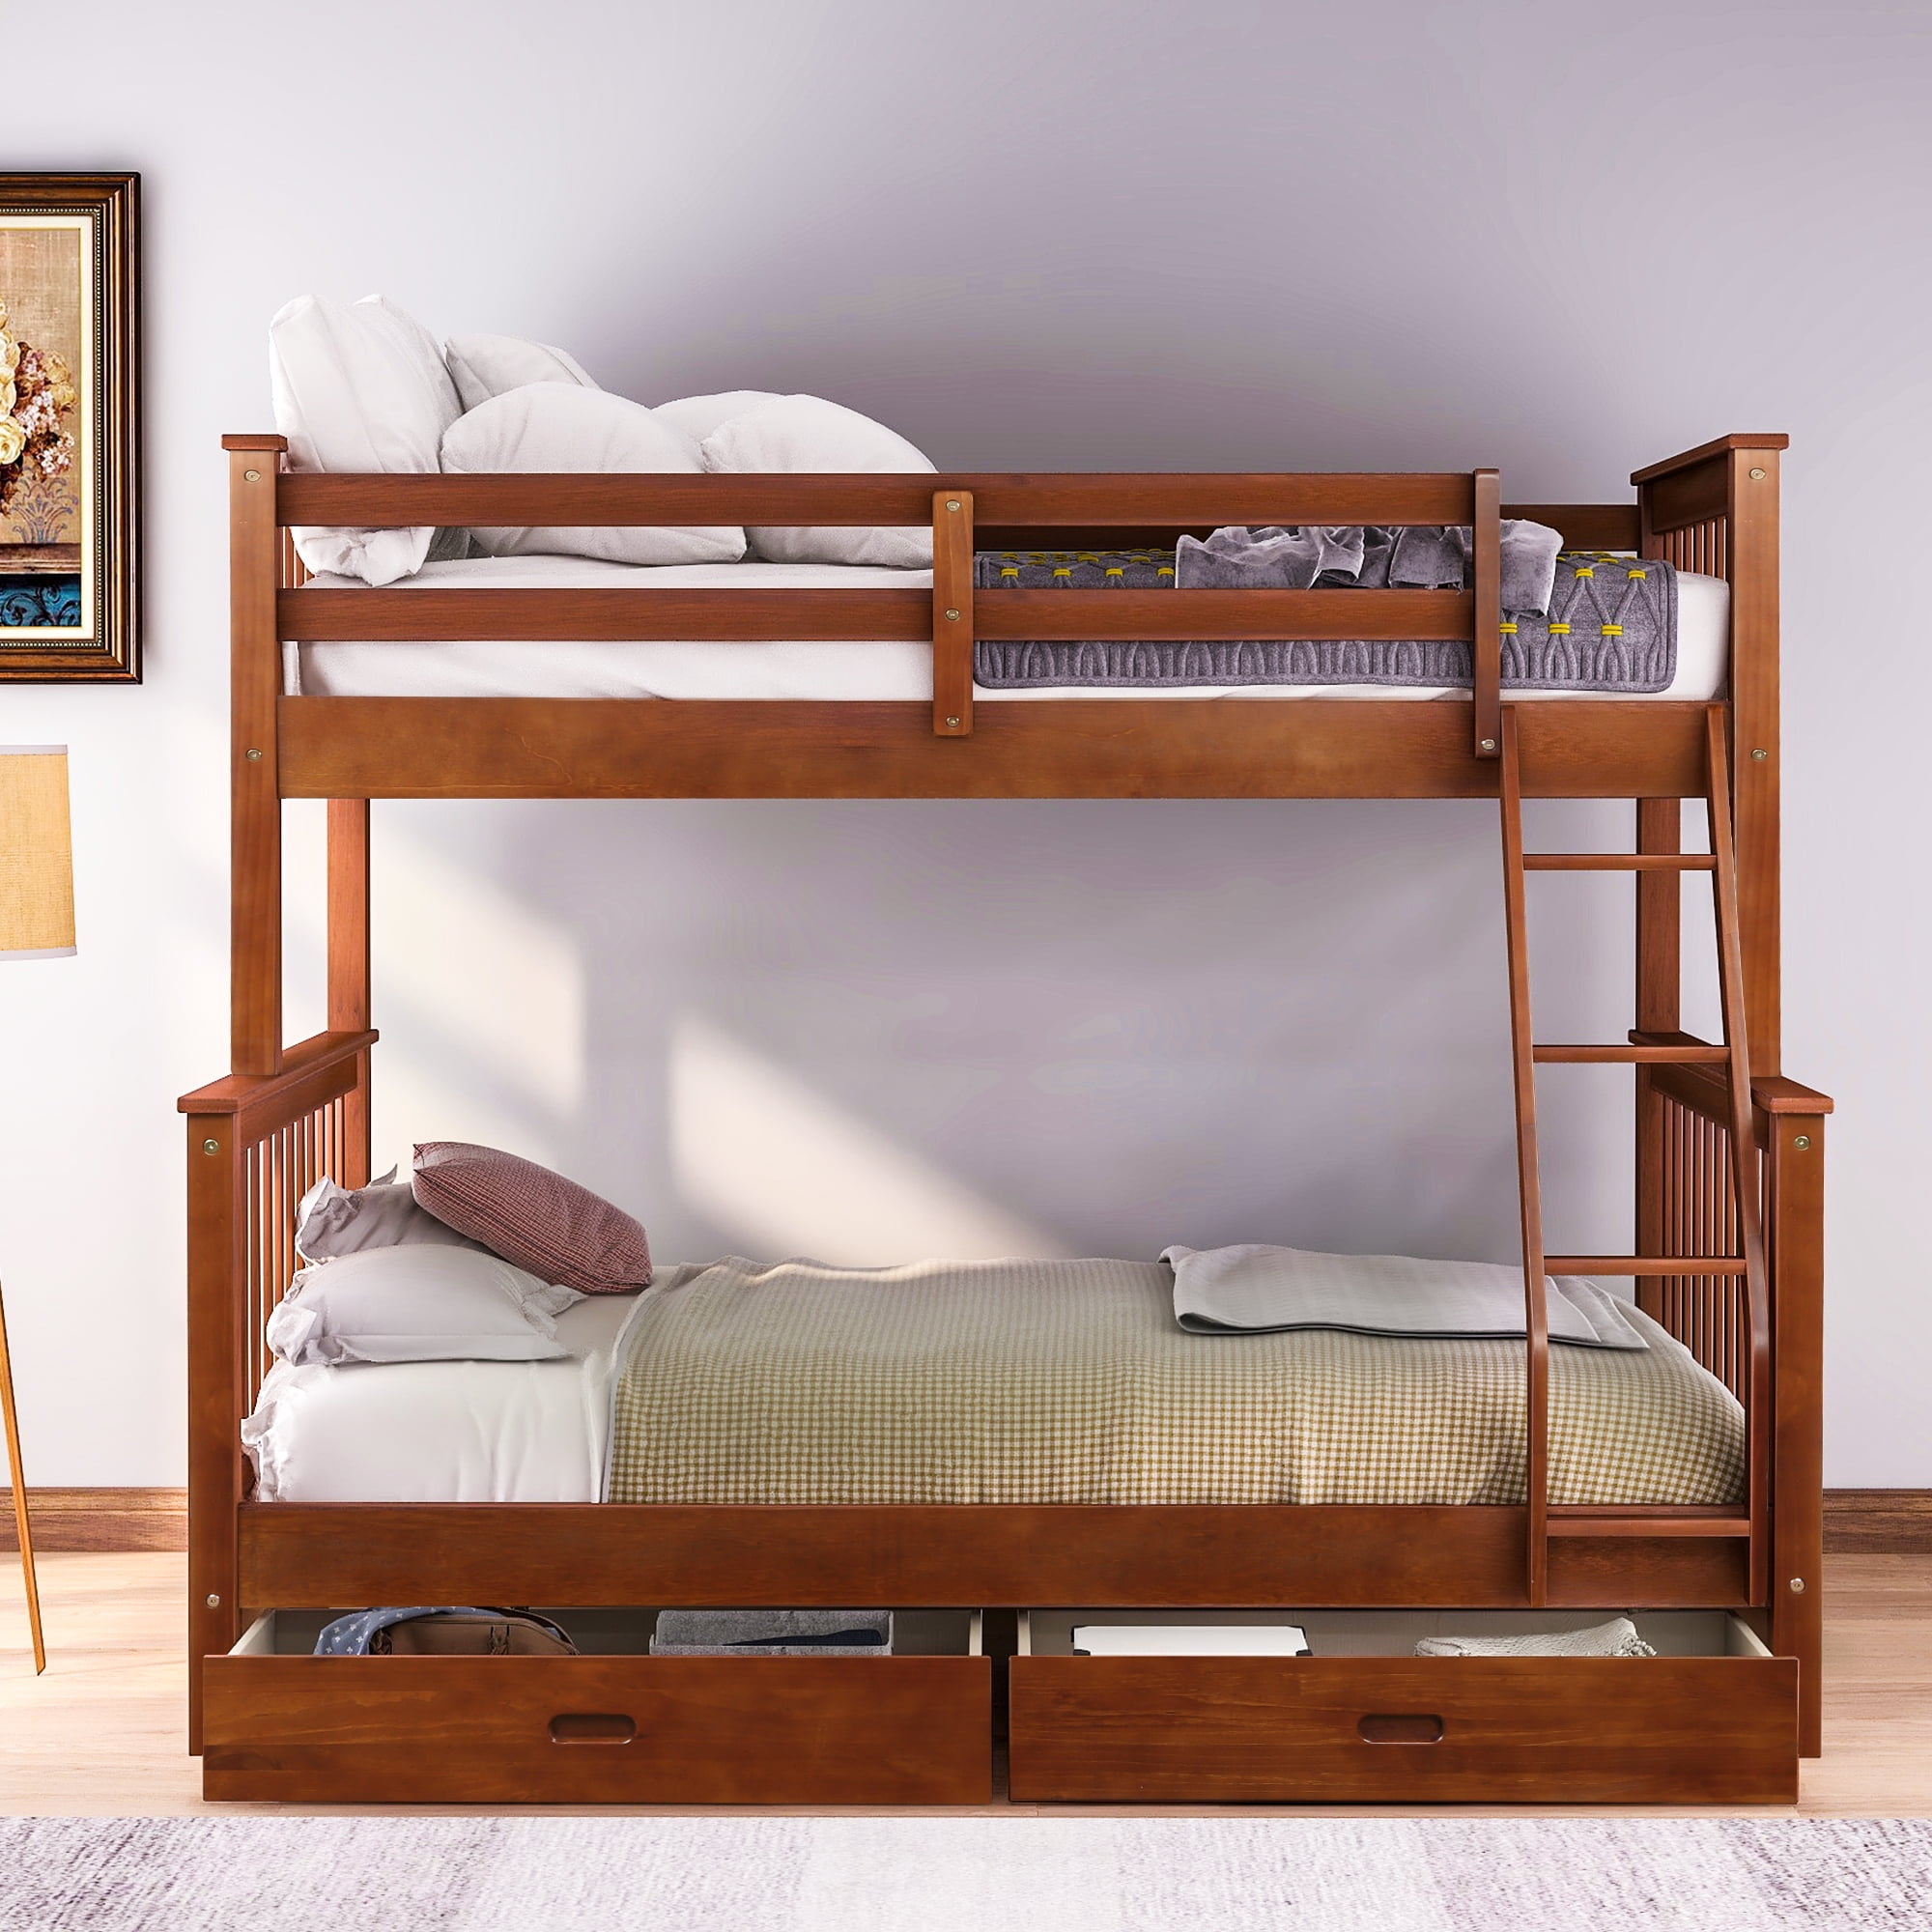 Bunk Beds Twin Over Full Solid Wood, Solid Wood Bunk Beds For Kids